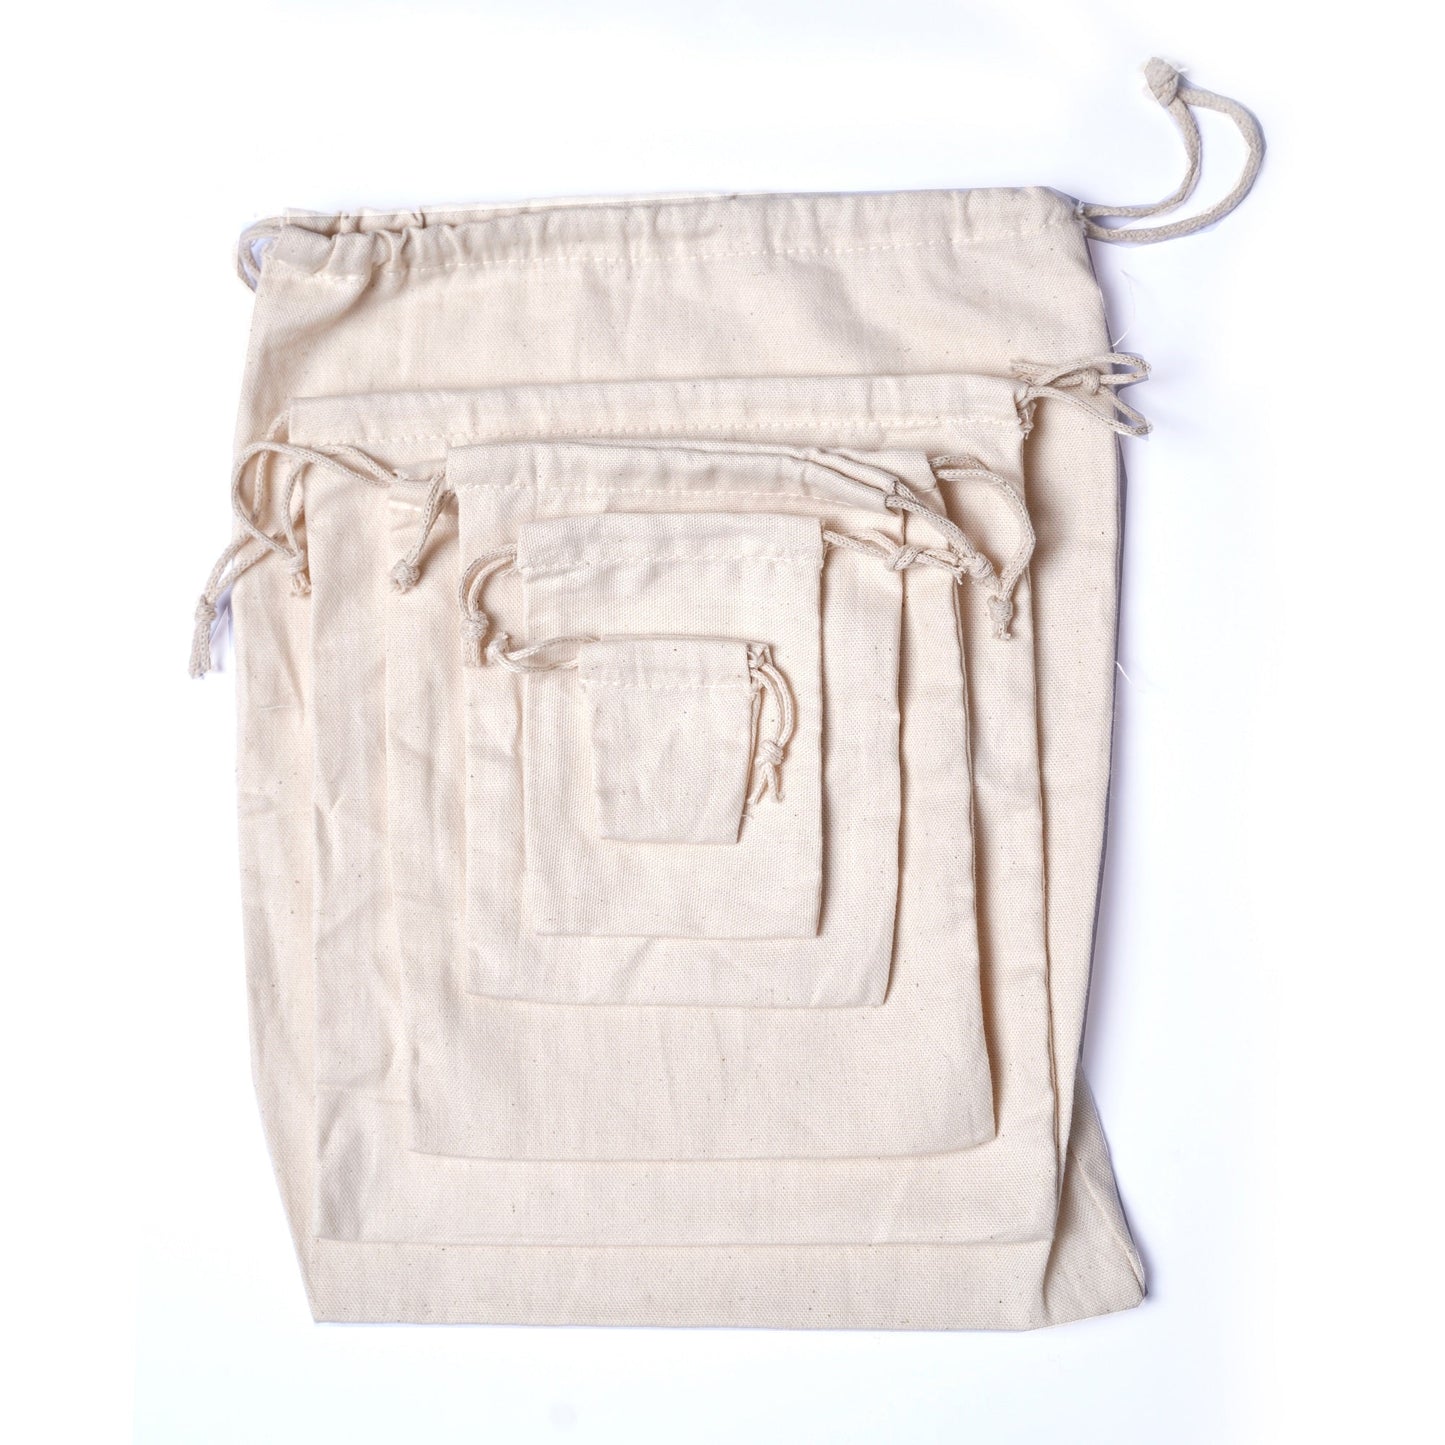 6x10 Inches Reusable Eco-Friendly Double Drawstring Cotton CANVAS Bags Natural Color